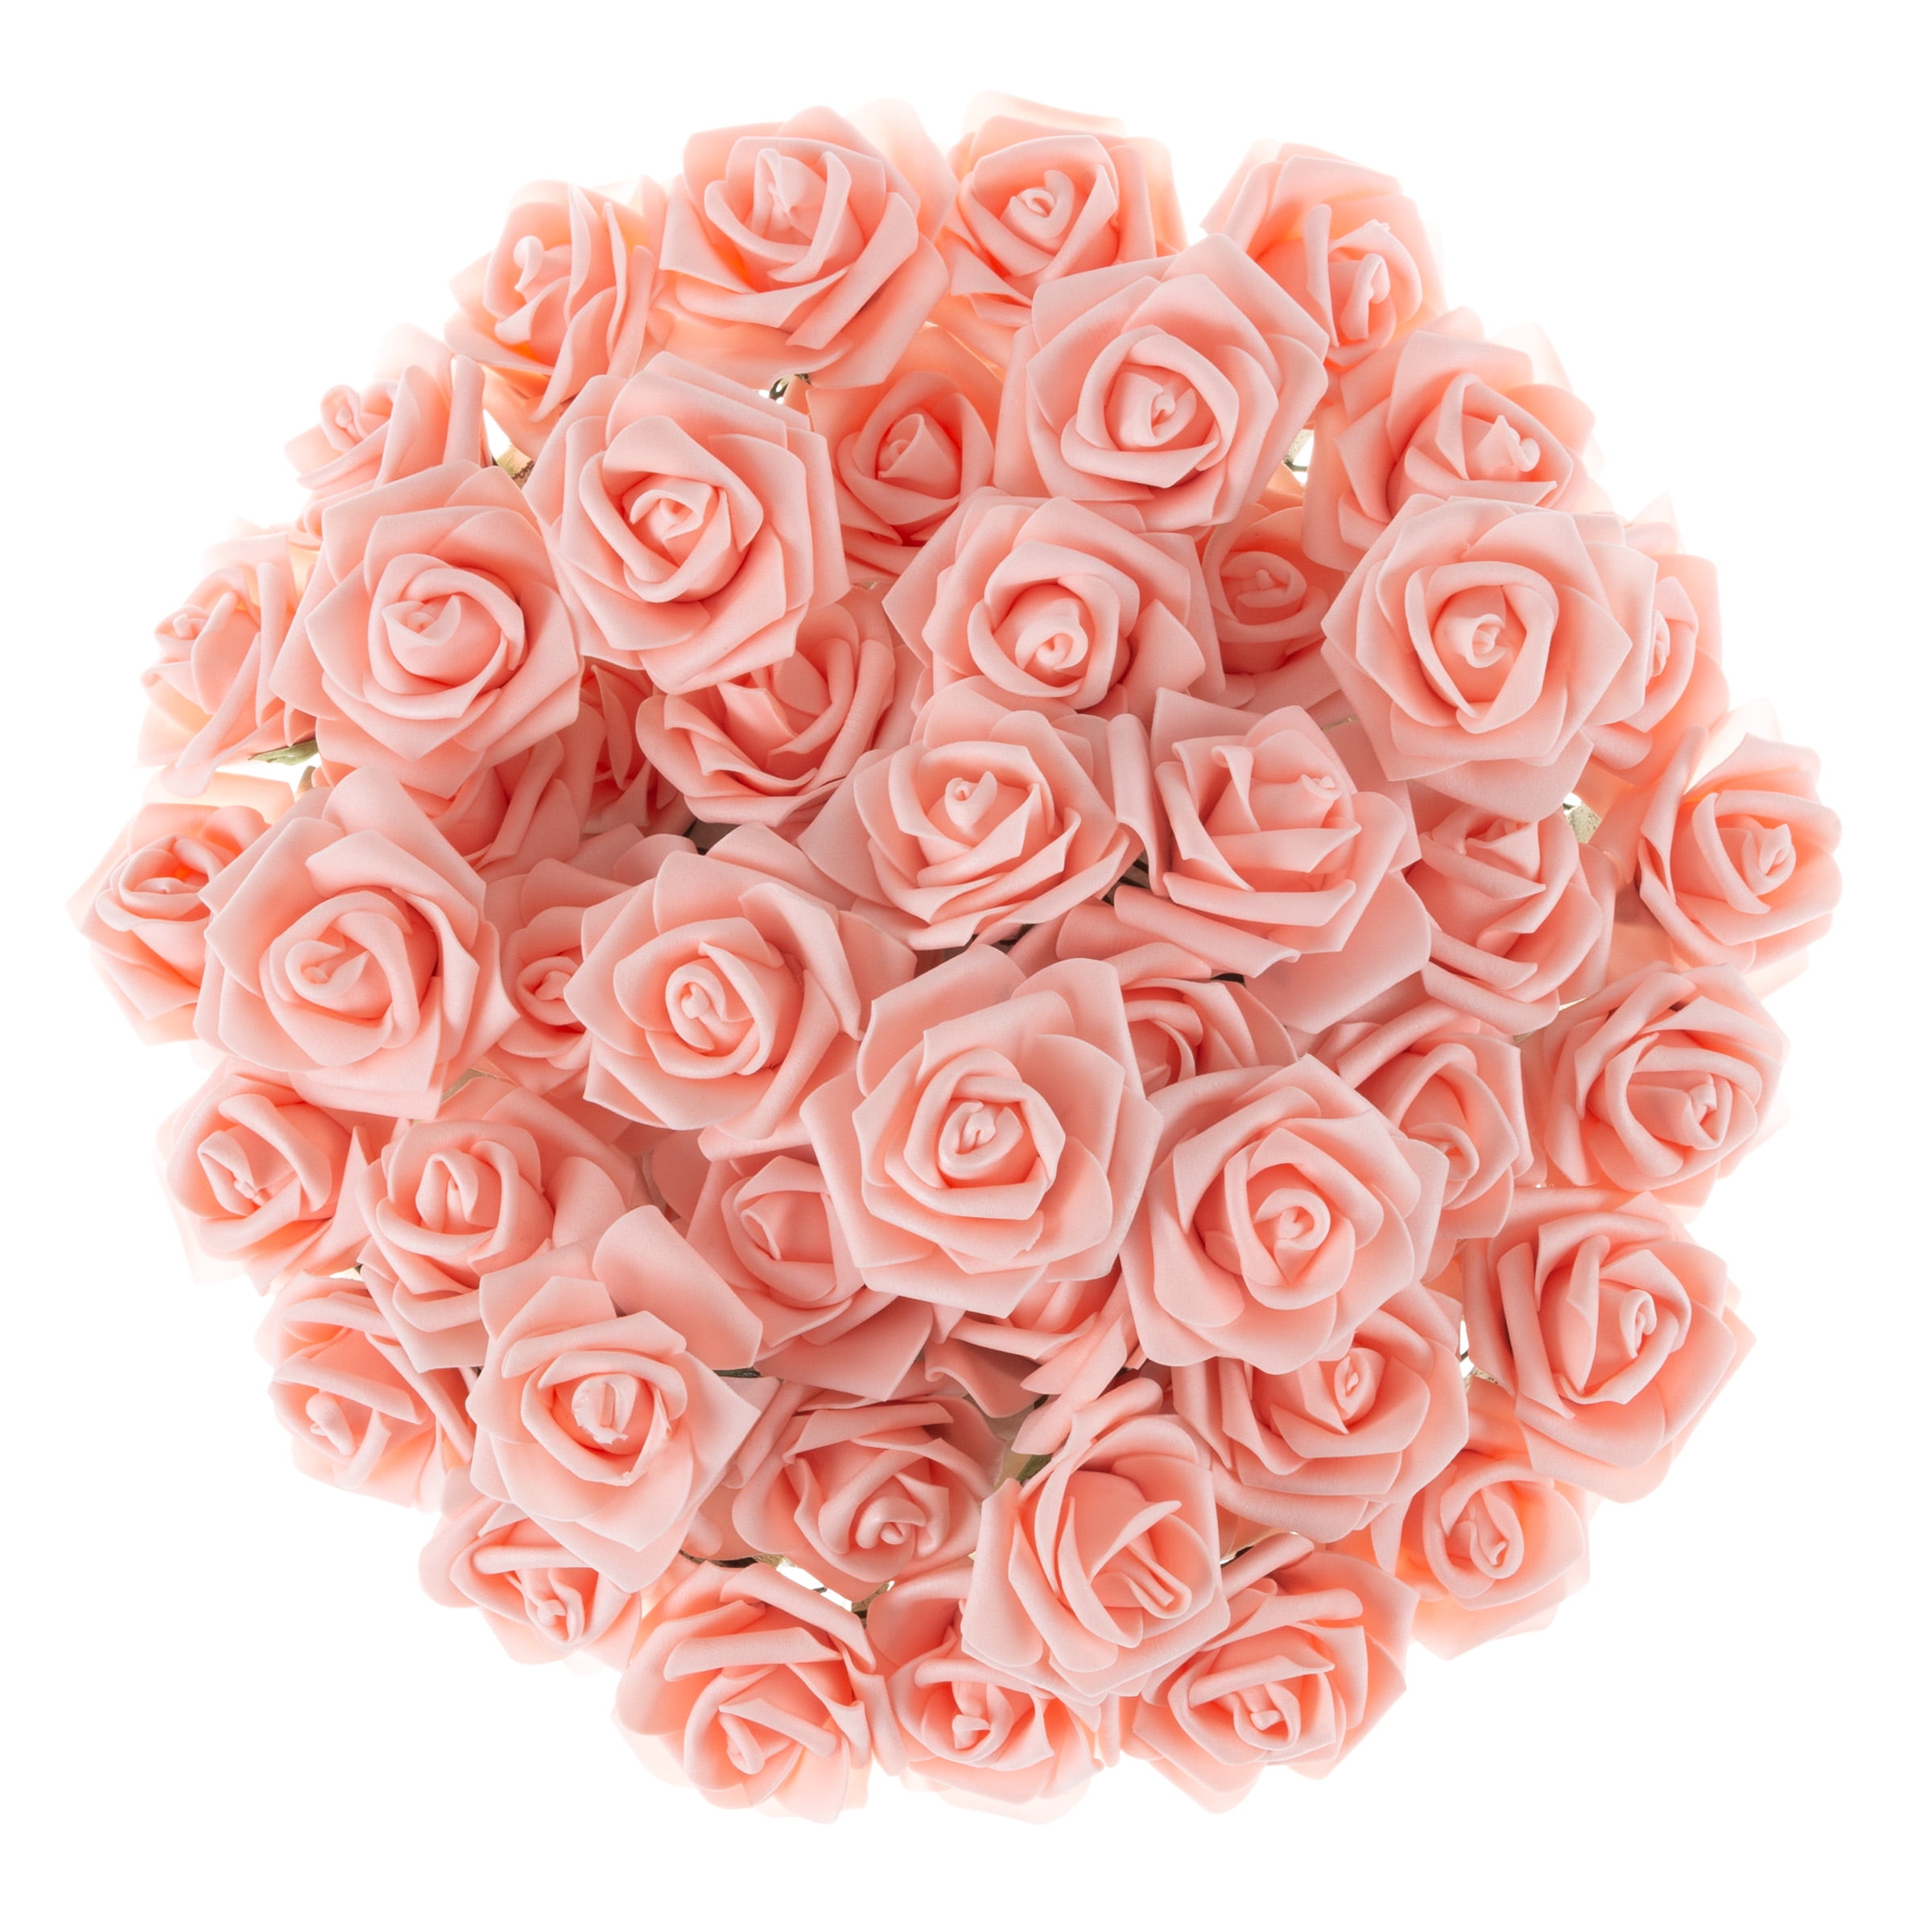 Artificial Roses With Stems- Real Touch Fake Flowers For Home Decor,  Wedding, Bridal/Baby Shower, Centerpiece, More, 50 Pieces Set By Pure  Garden (Blush) - Walmart.com